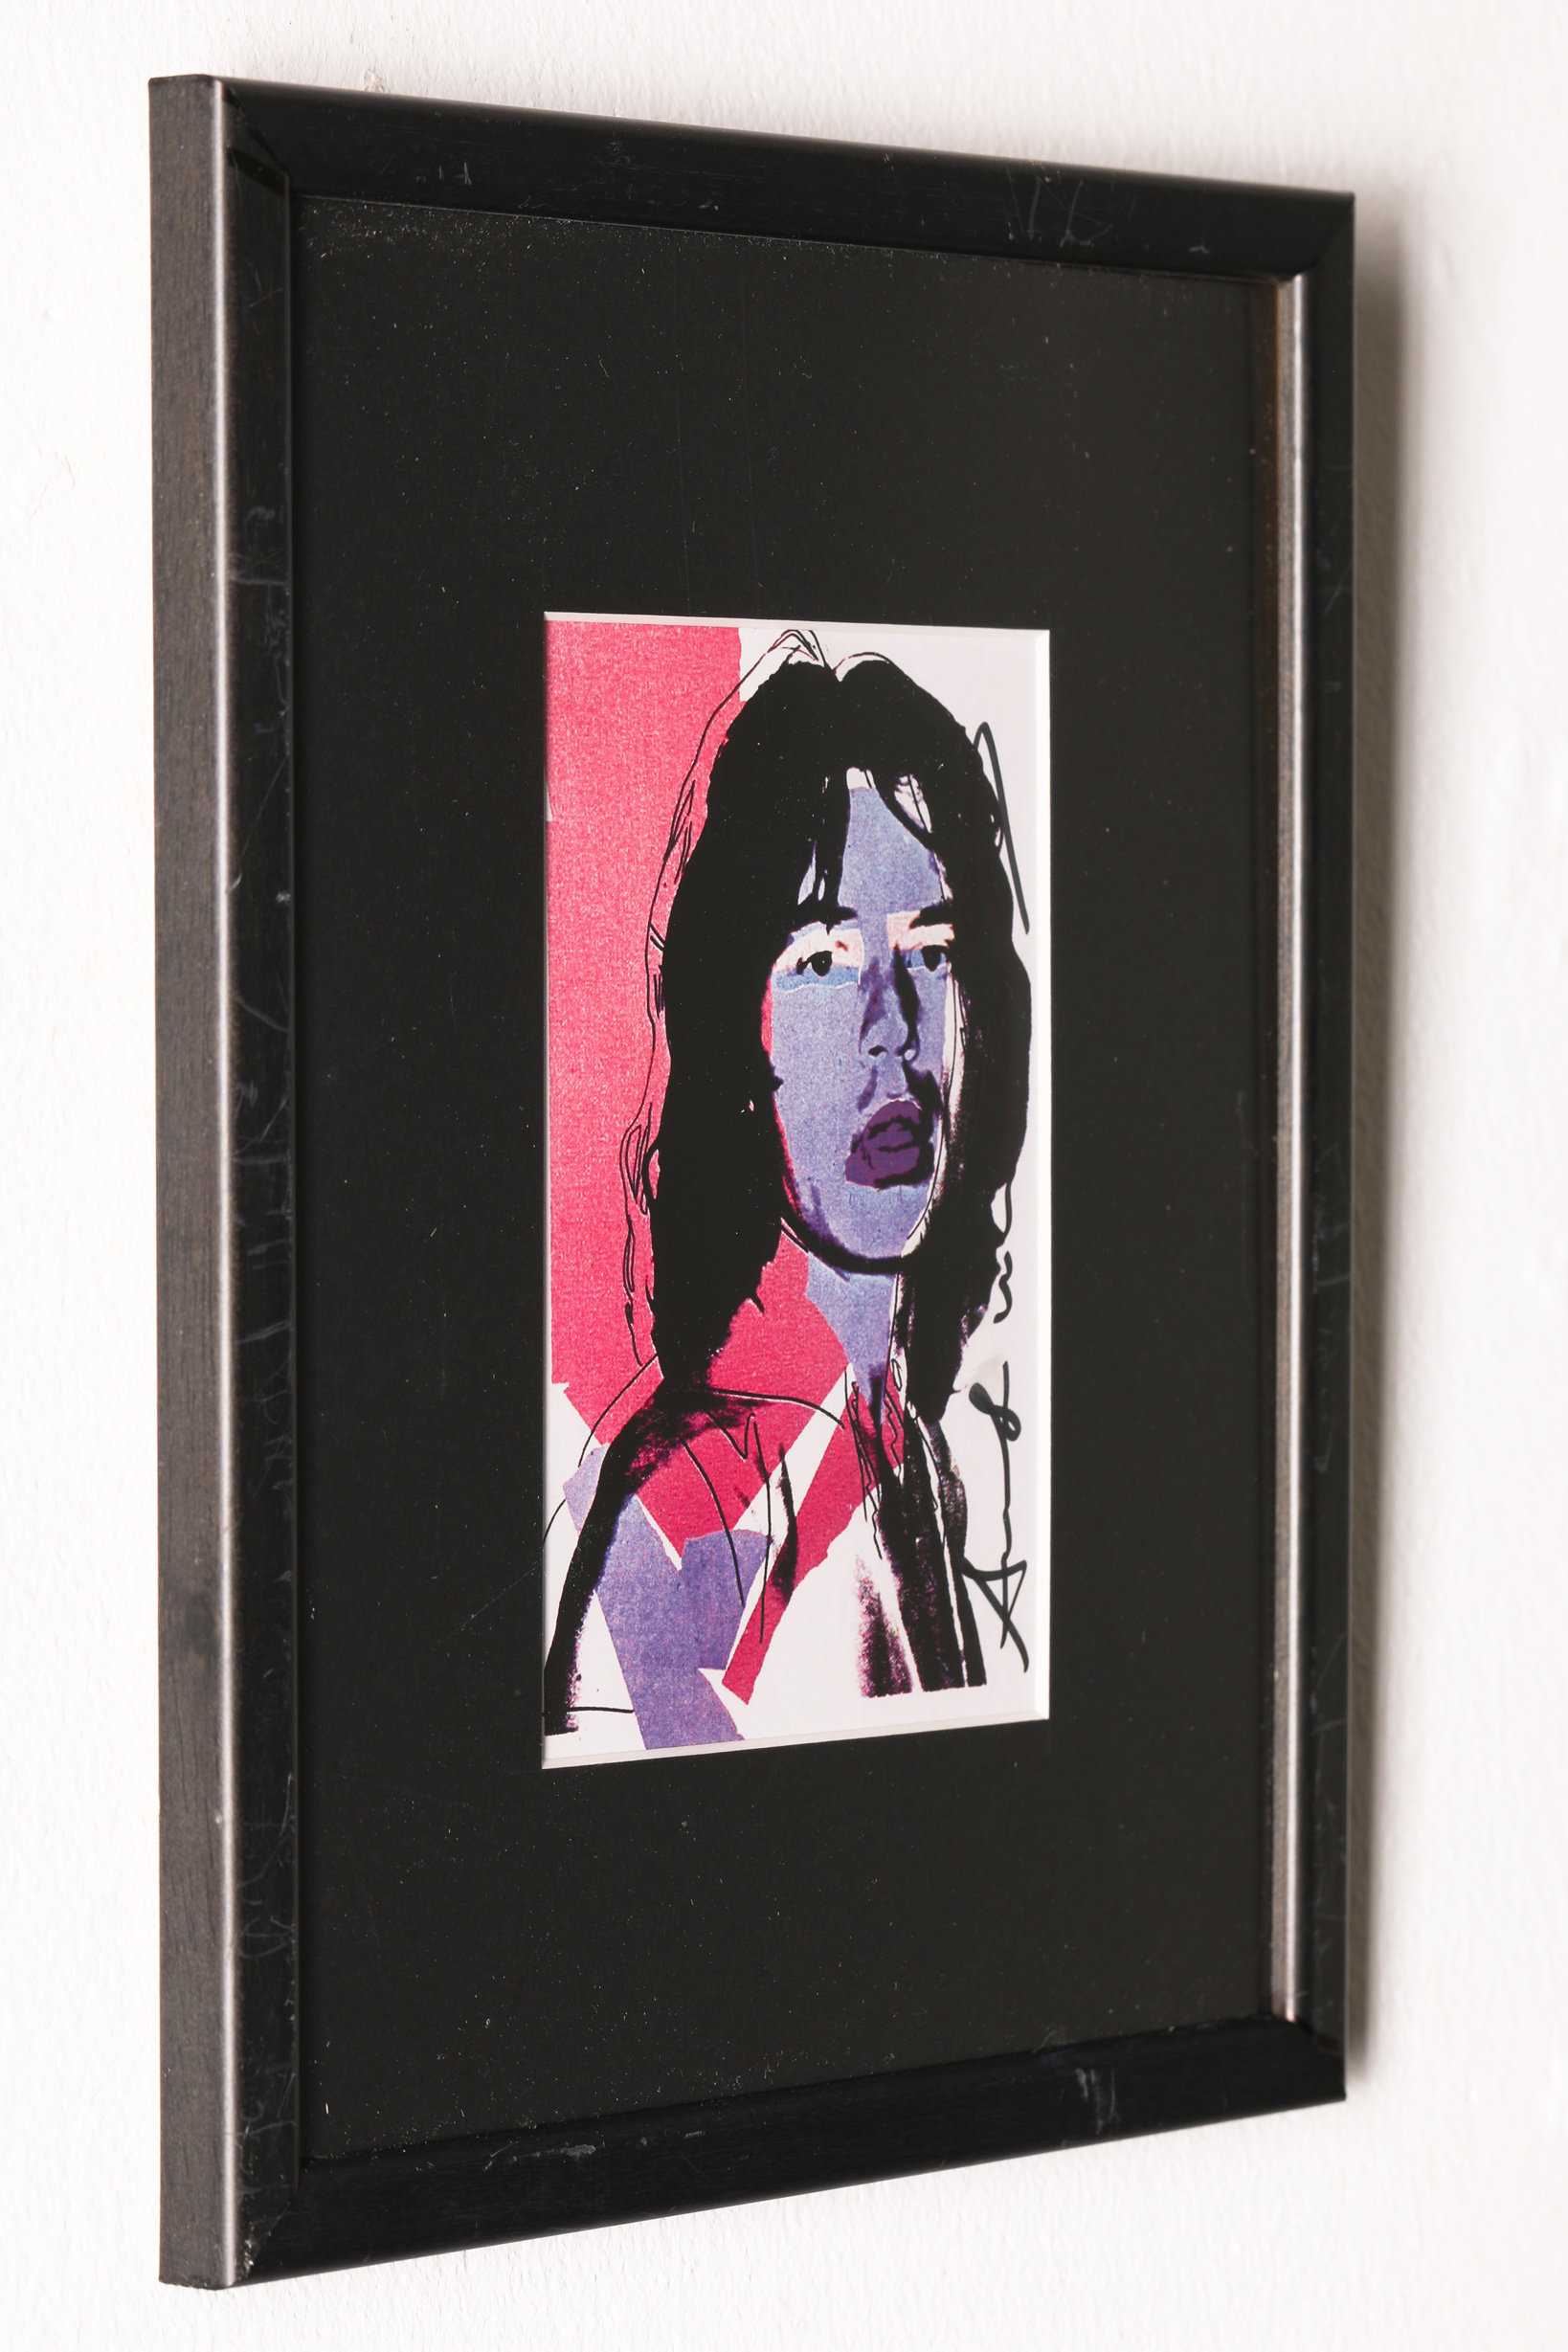 Andy Warhol, Mini Portfolio Mick Jagger with 10 Prints, 1975, signed - Image 2 of 16